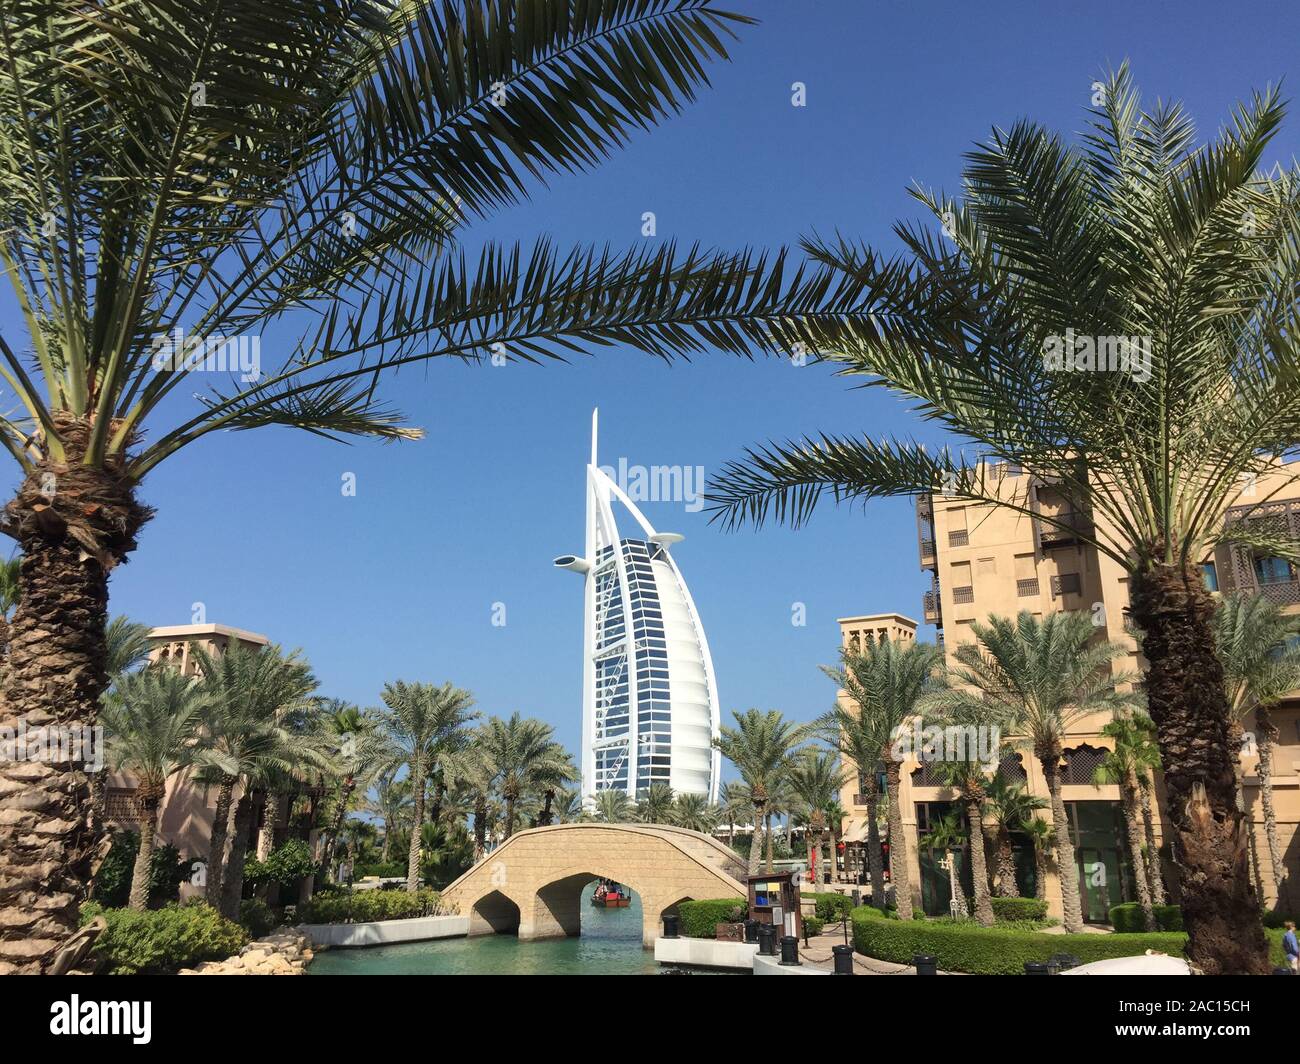 Dubai, UAE - Dec 9, 2018. View of Burj Al Arab hotel from Madinat Jumeirah. Madinat is a luxury resort which includes hotels and souk covering an area Stock Photo